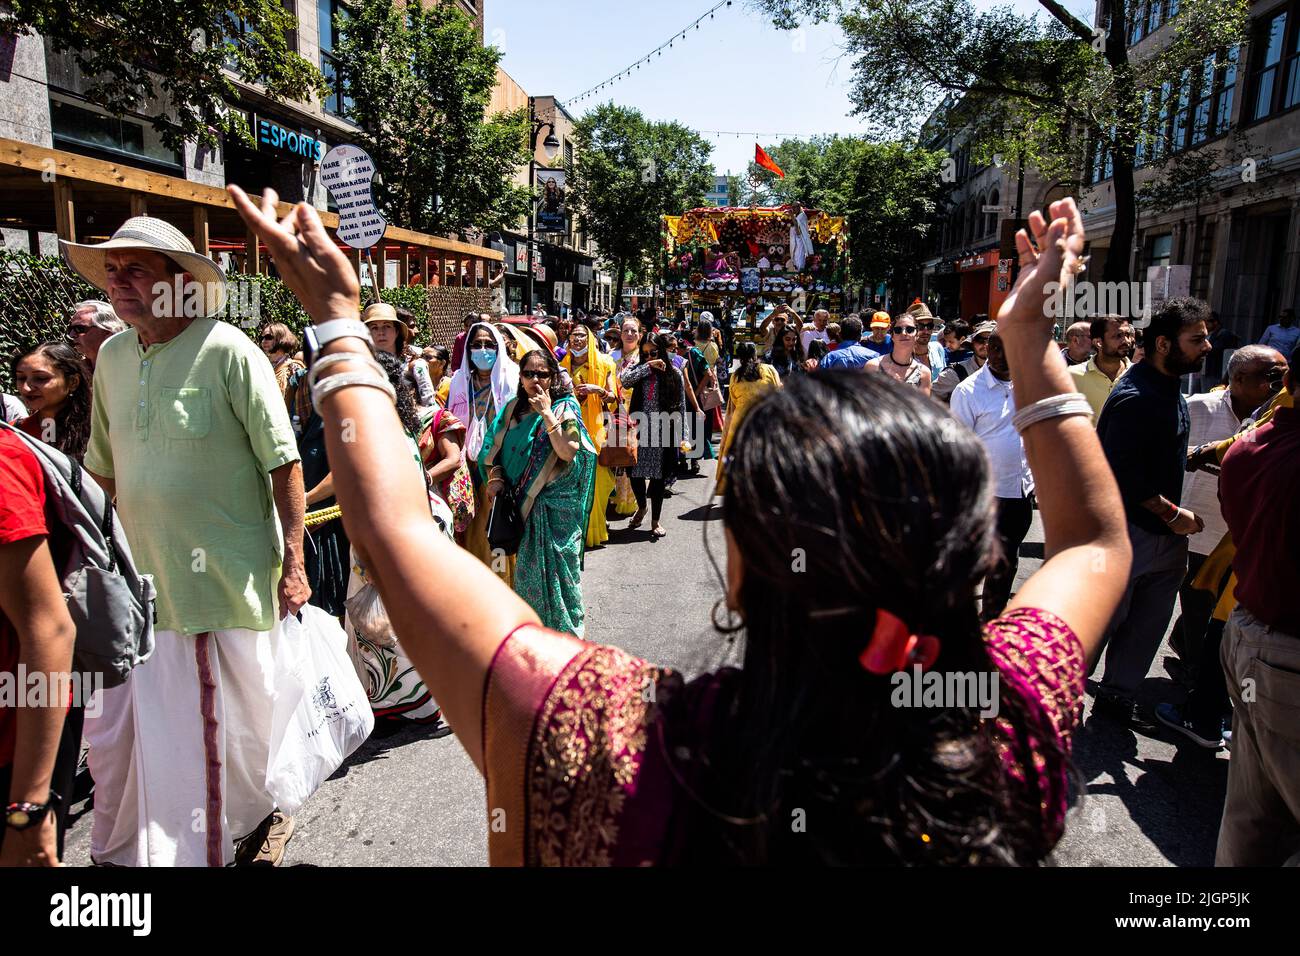 A devotee salutes the main cart during the celebration. Stock Photo